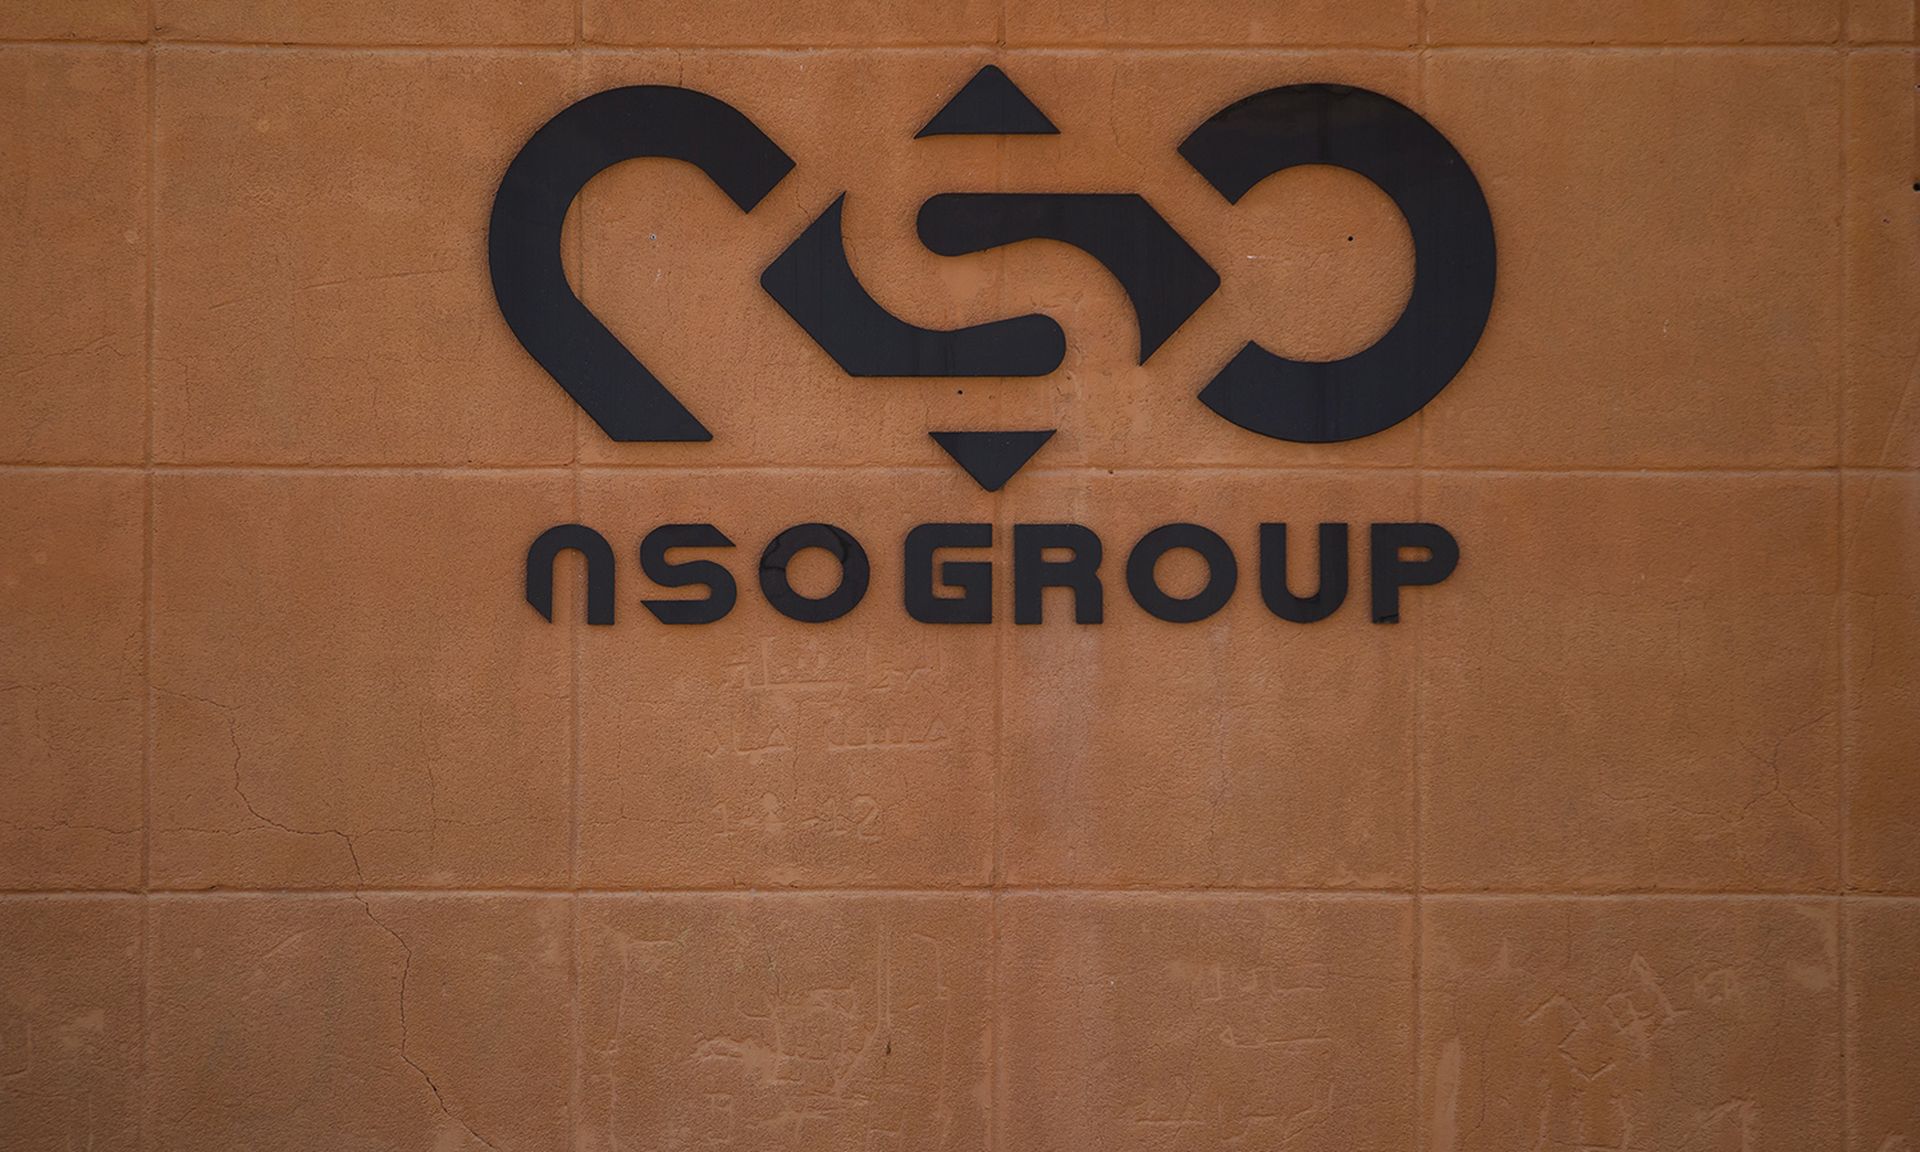 A reported sale of spyware vendor NSO Group to a U.S. defense contractor would invite scrutiny from regulators, experts say. Pictured: The logo of Israeli cyber company NSO Group seen at one of its branches in the Arava Desert on Nov. 11, 2021, in Sapir, Israel. (Photo by Amir Levy/Getty Images)